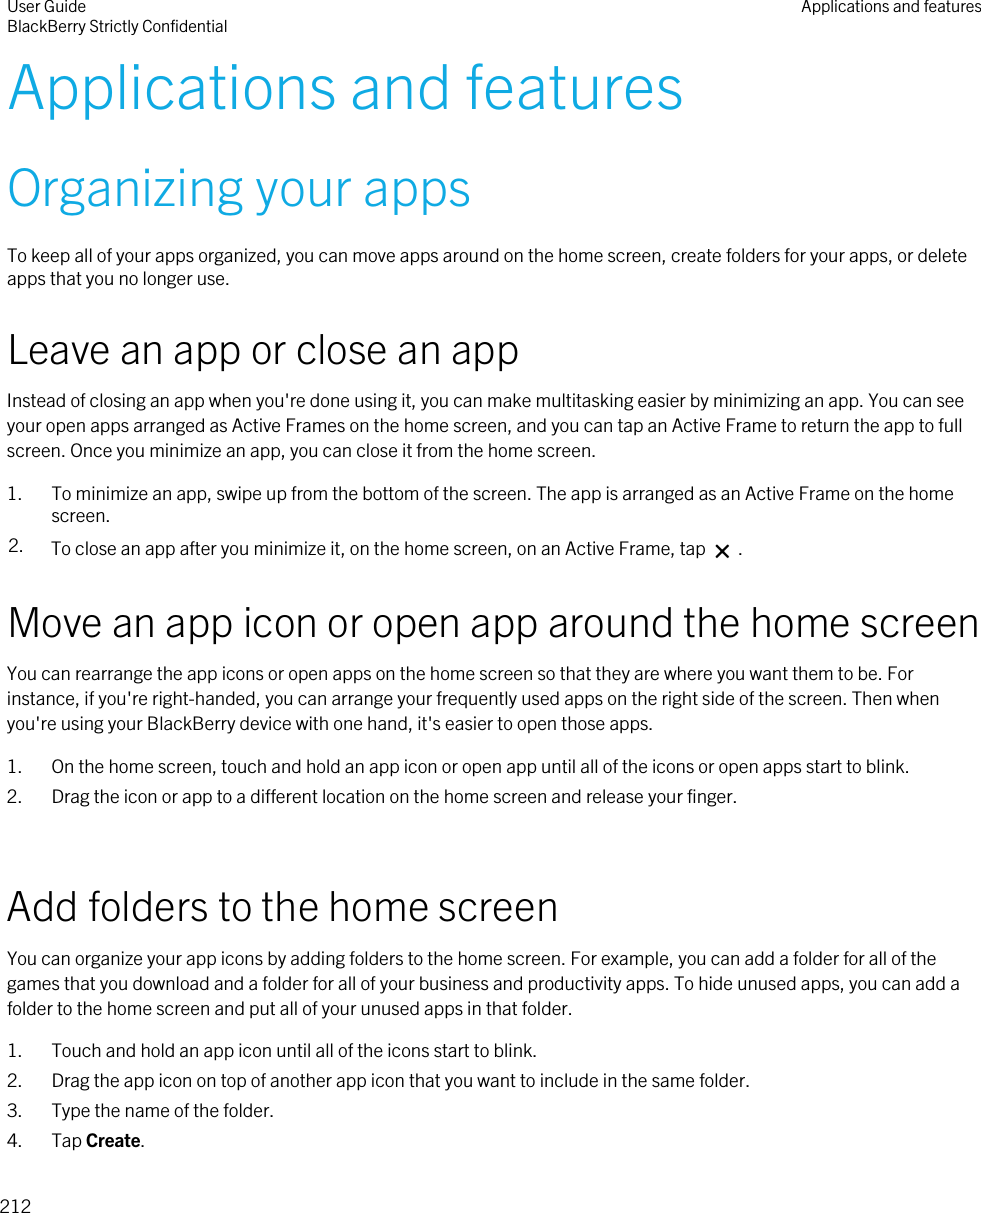 Applications and featuresOrganizing your appsTo keep all of your apps organized, you can move apps around on the home screen, create folders for your apps, or delete apps that you no longer use.Leave an app or close an appInstead of closing an app when you&apos;re done using it, you can make multitasking easier by minimizing an app. You can see your open apps arranged as Active Frames on the home screen, and you can tap an Active Frame to return the app to full screen. Once you minimize an app, you can close it from the home screen.1. To minimize an app, swipe up from the bottom of the screen. The app is arranged as an Active Frame on the home screen.2. To close an app after you minimize it, on the home screen, on an Active Frame, tap   .Move an app icon or open app around the home screenYou can rearrange the app icons or open apps on the home screen so that they are where you want them to be. For instance, if you&apos;re right-handed, you can arrange your frequently used apps on the right side of the screen. Then when you&apos;re using your BlackBerry device with one hand, it&apos;s easier to open those apps.1. On the home screen, touch and hold an app icon or open app until all of the icons or open apps start to blink.2. Drag the icon or app to a different location on the home screen and release your finger.Add folders to the home screenYou can organize your app icons by adding folders to the home screen. For example, you can add a folder for all of the games that you download and a folder for all of your business and productivity apps. To hide unused apps, you can add a folder to the home screen and put all of your unused apps in that folder.1. Touch and hold an app icon until all of the icons start to blink.2. Drag the app icon on top of another app icon that you want to include in the same folder.3. Type the name of the folder.4. Tap Create.User GuideBlackBerry Strictly Confidential Applications and features212